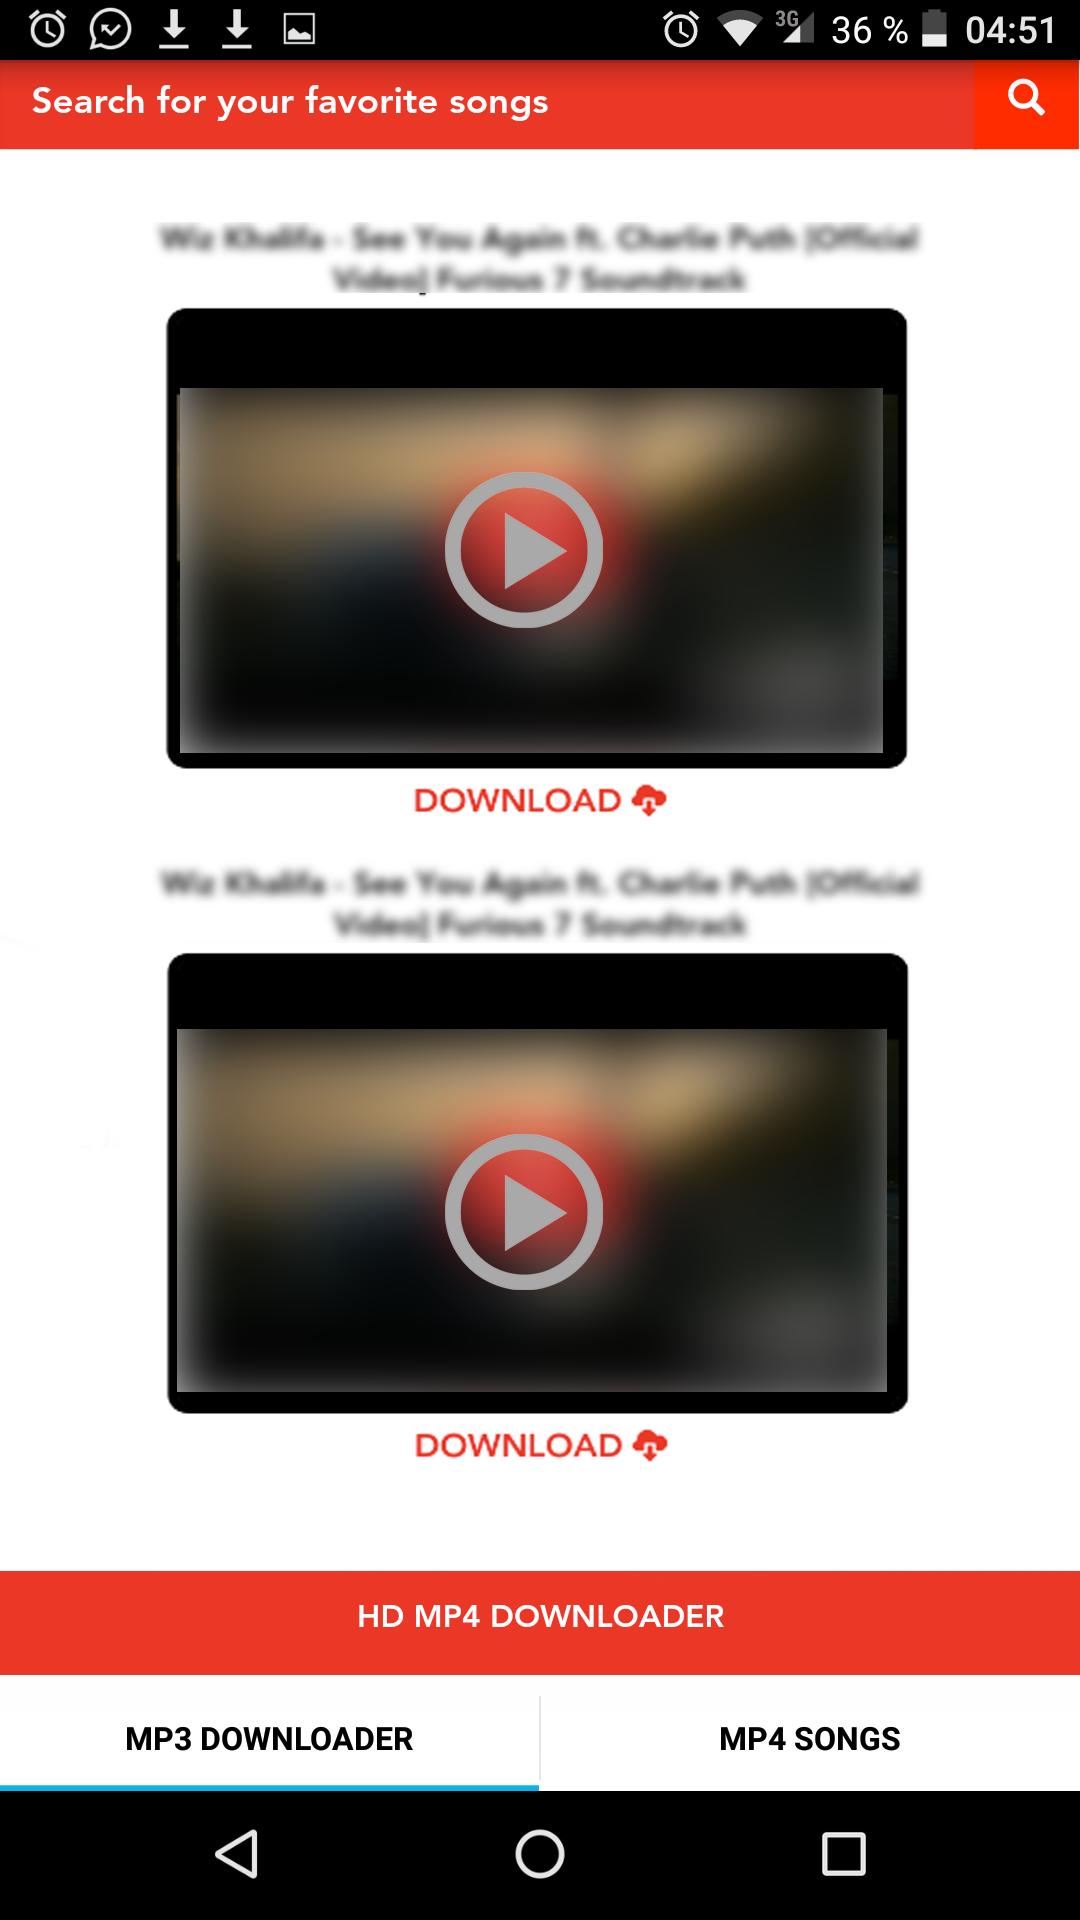 Hd Mp4 Music Downloader Download Videos For Free For Android Apk Download